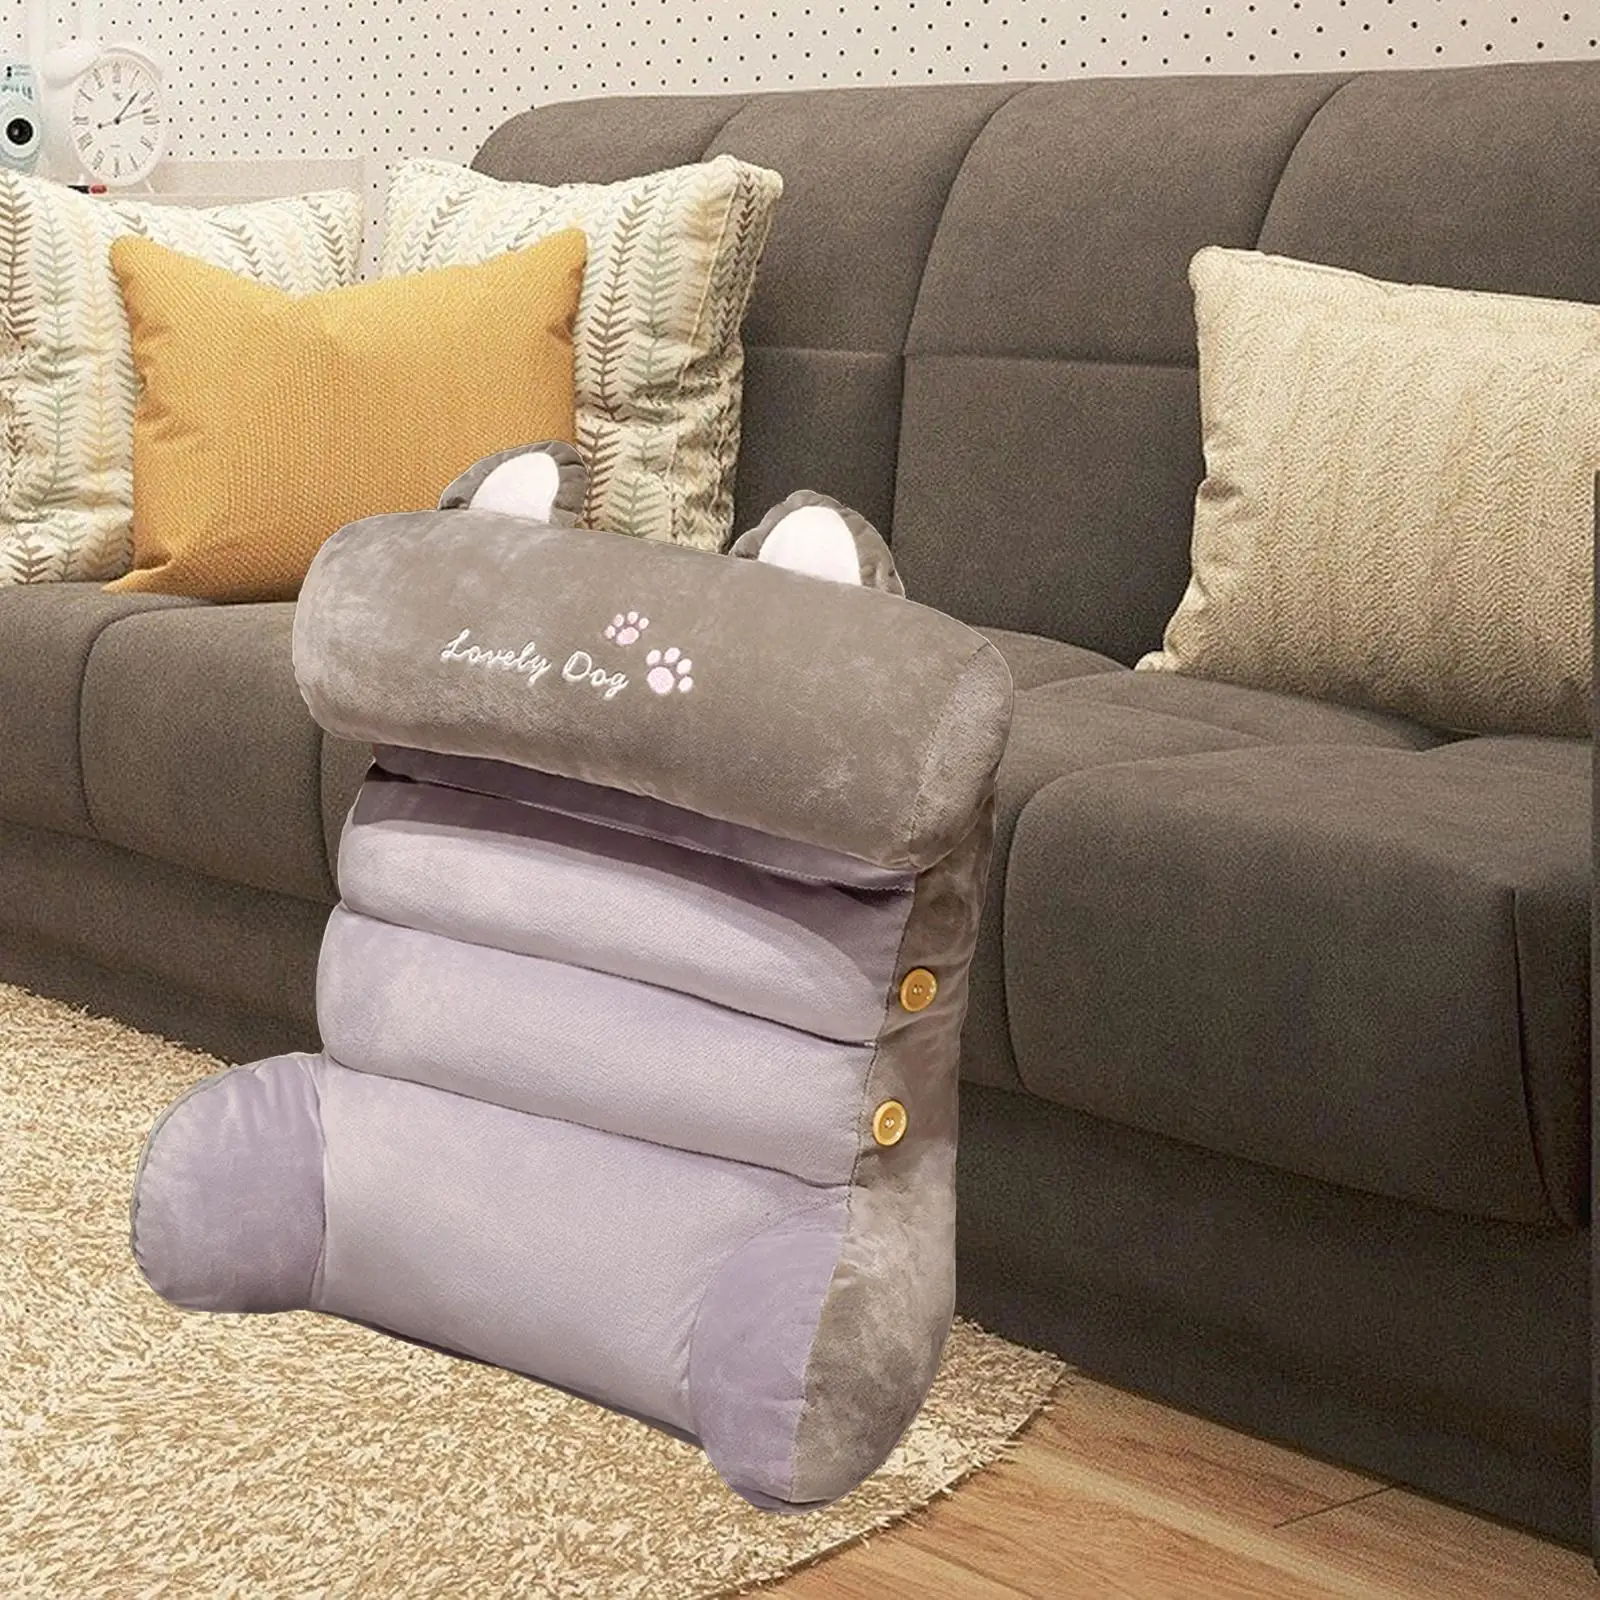 Plush Backrest Pillow waist Support Cushion Back Cushion Stain Resistant Seat Cushion Cute Bed Pillow for Bedroom Sofa